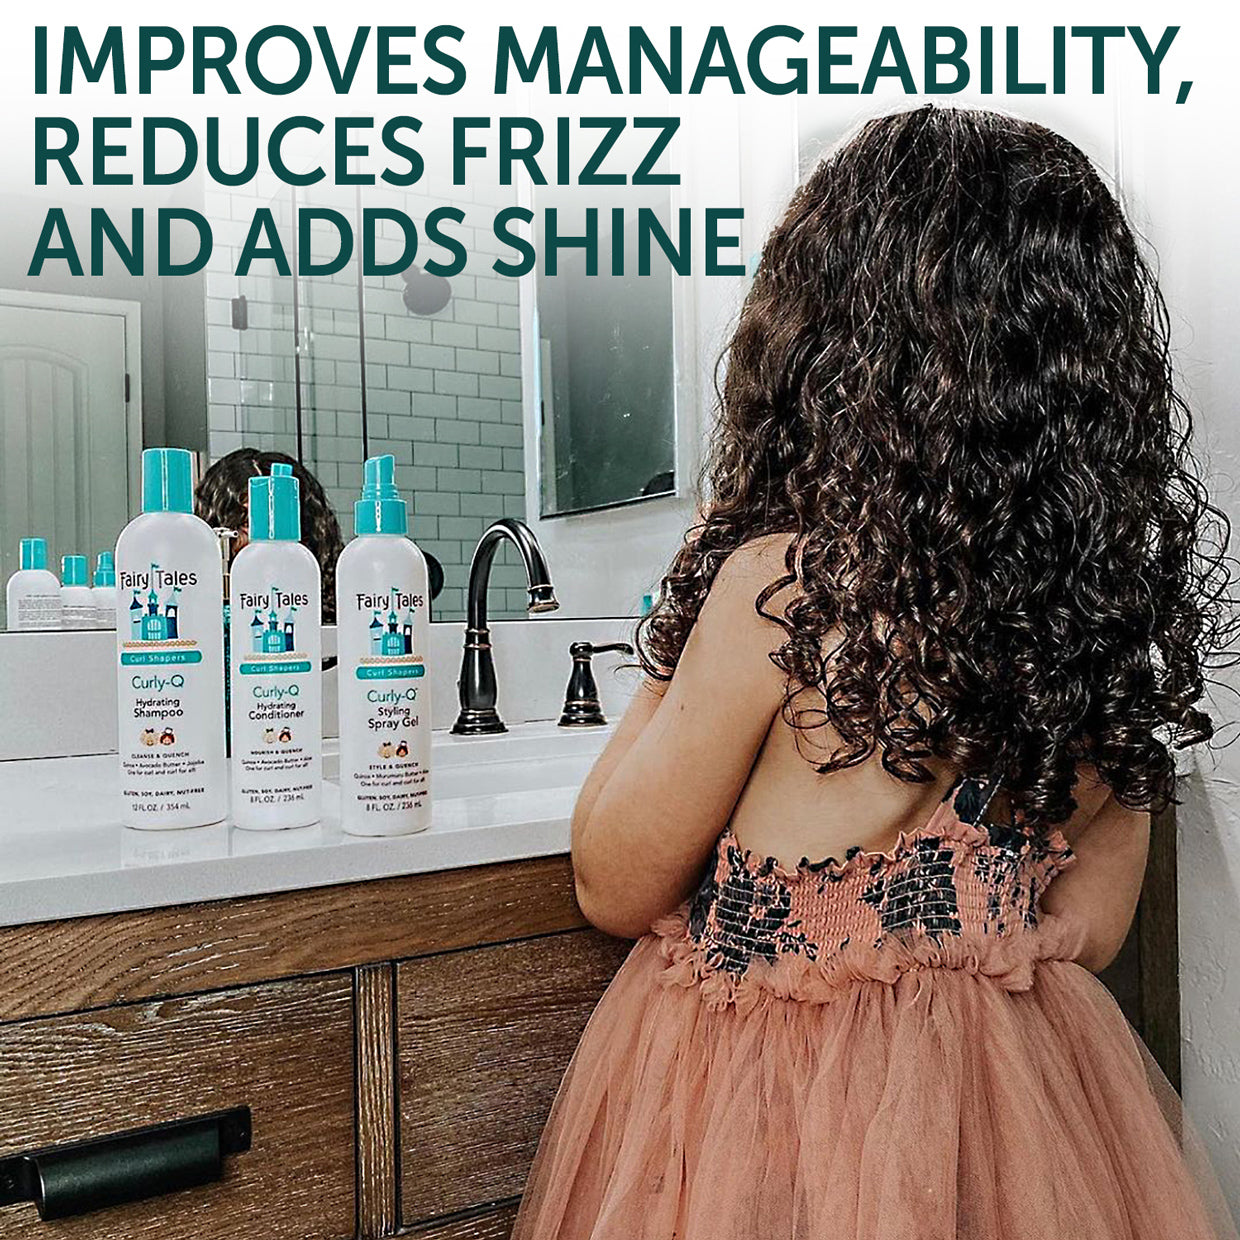 Curly-Q™ Kids Curly Hair Shampoo & Conditioner Kits